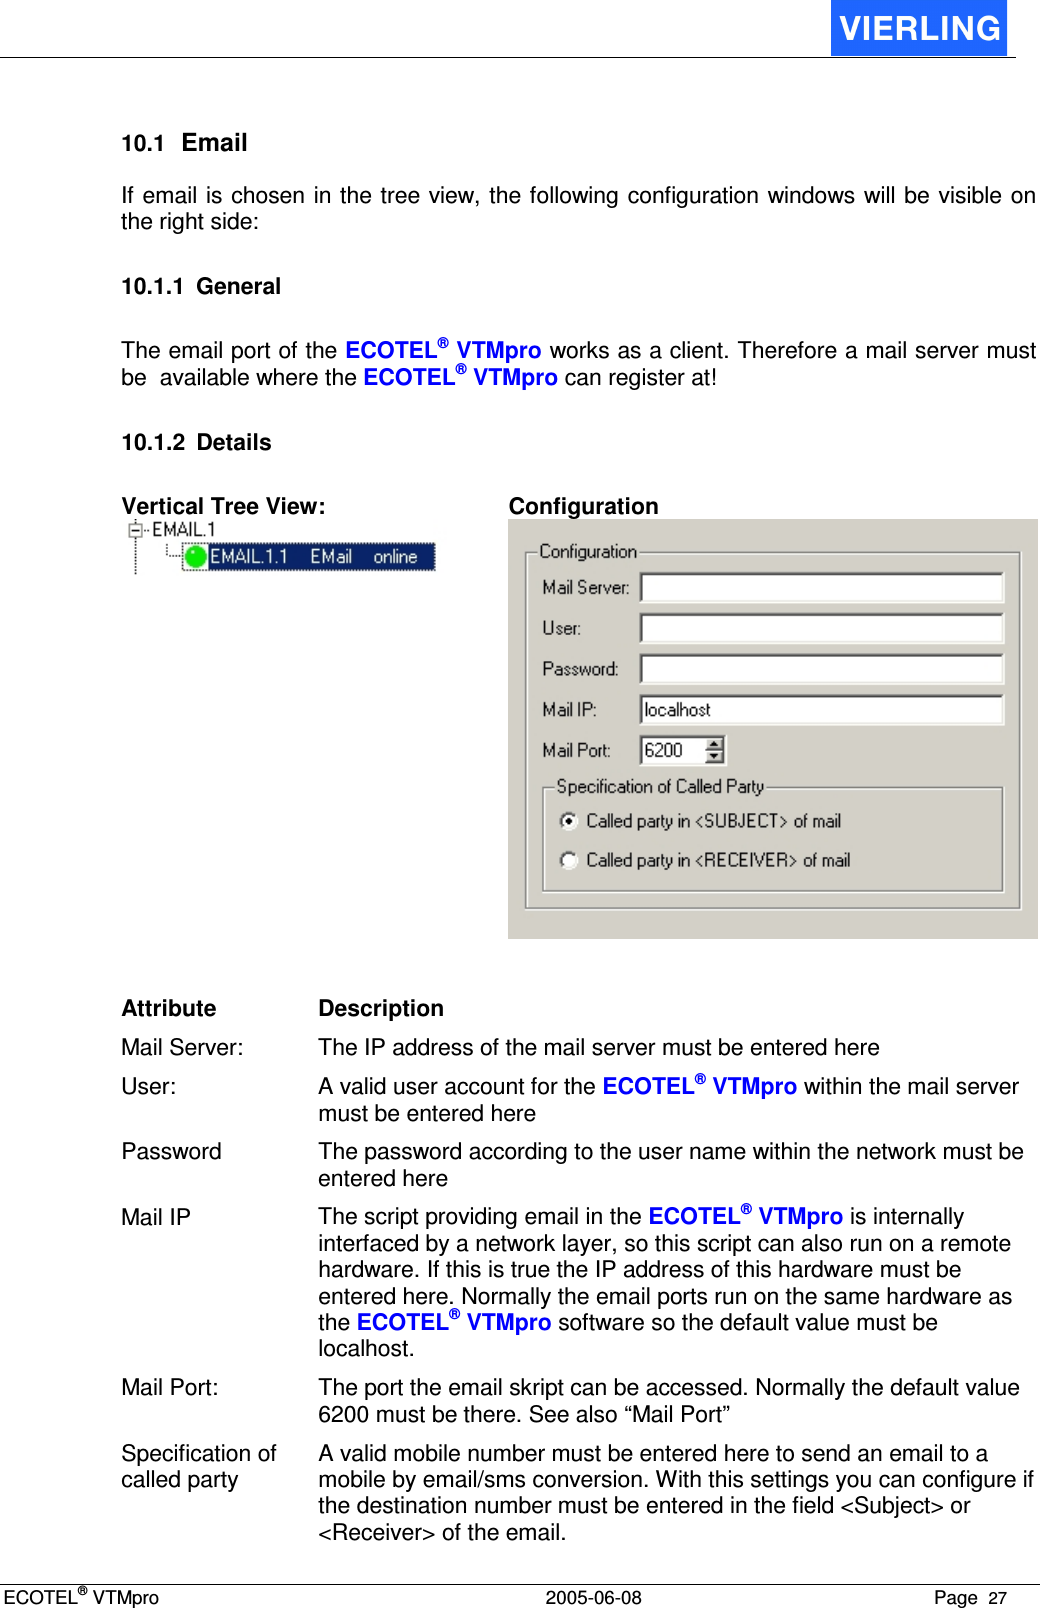 ECOTEL® VTMpro  2005-06-08 Page  27    10.1 Email If email is chosen in the tree view, the following configuration windows will be visible on the right side:  10.1.1  General The email port of the ECOTEL® VTMpro works as a client. Therefore a mail server must be  available where the ECOTEL® VTMpro can register at!  10.1.2  Details Vertical Tree View:  Configuration   Attribute  Description Mail Server:  The IP address of the mail server must be entered here User:  A valid user account for the ECOTEL® VTMpro within the mail server must be entered here Password  The password according to the user name within the network must be entered here  Mail IP  The script providing email in the ECOTEL® VTMpro is internally interfaced by a network layer, so this script can also run on a remote hardware. If this is true the IP address of this hardware must be entered here. Normally the email ports run on the same hardware as the ECOTEL® VTMpro software so the default value must be localhost. Mail Port:  The port the email skript can be accessed. Normally the default value 6200 must be there. See also “Mail Port” Specification of called party A valid mobile number must be entered here to send an email to a mobile by email/sms conversion. With this settings you can configure if the destination number must be entered in the field &lt;Subject&gt; or &lt;Receiver&gt; of the email. 